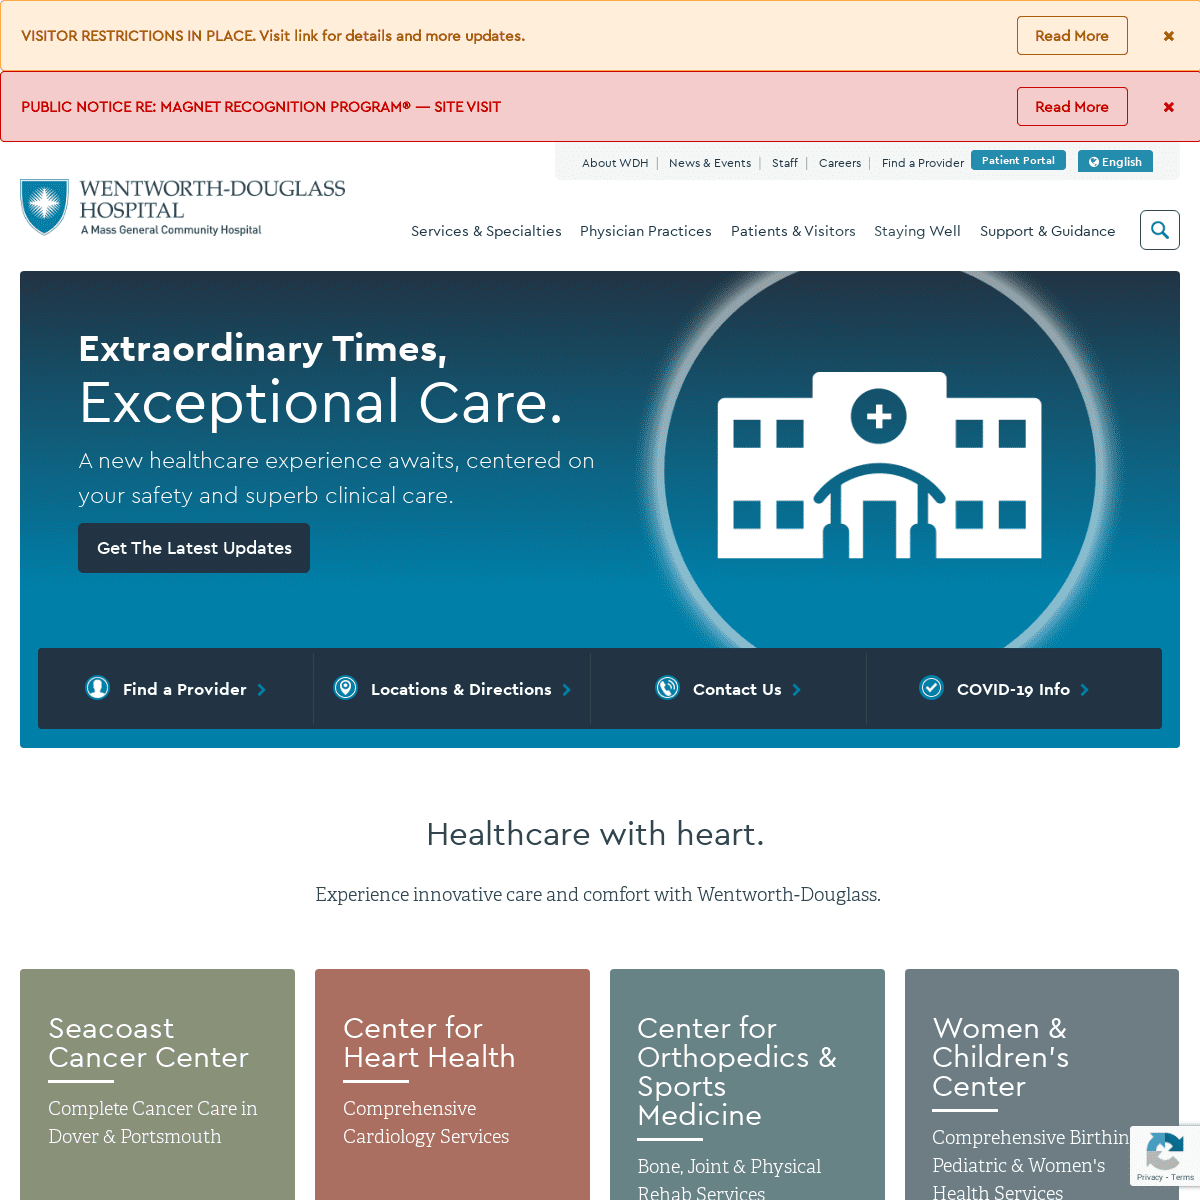 A complete backup of https://wdhospital.com